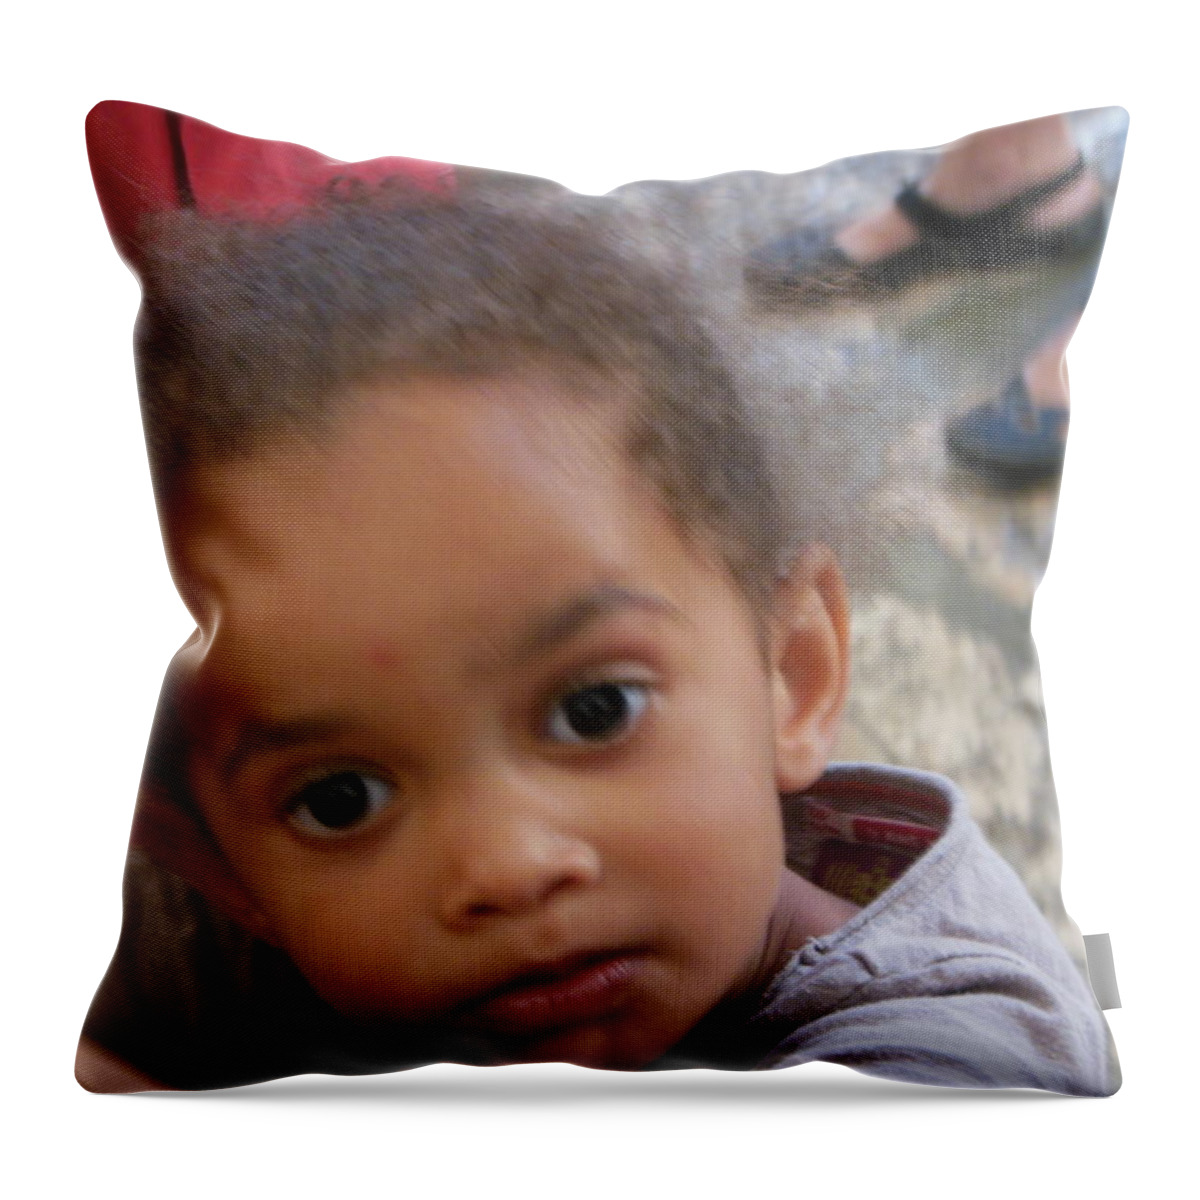 So Curious Throw Pillow featuring the photograph So Curious by Esther Newman-Cohen